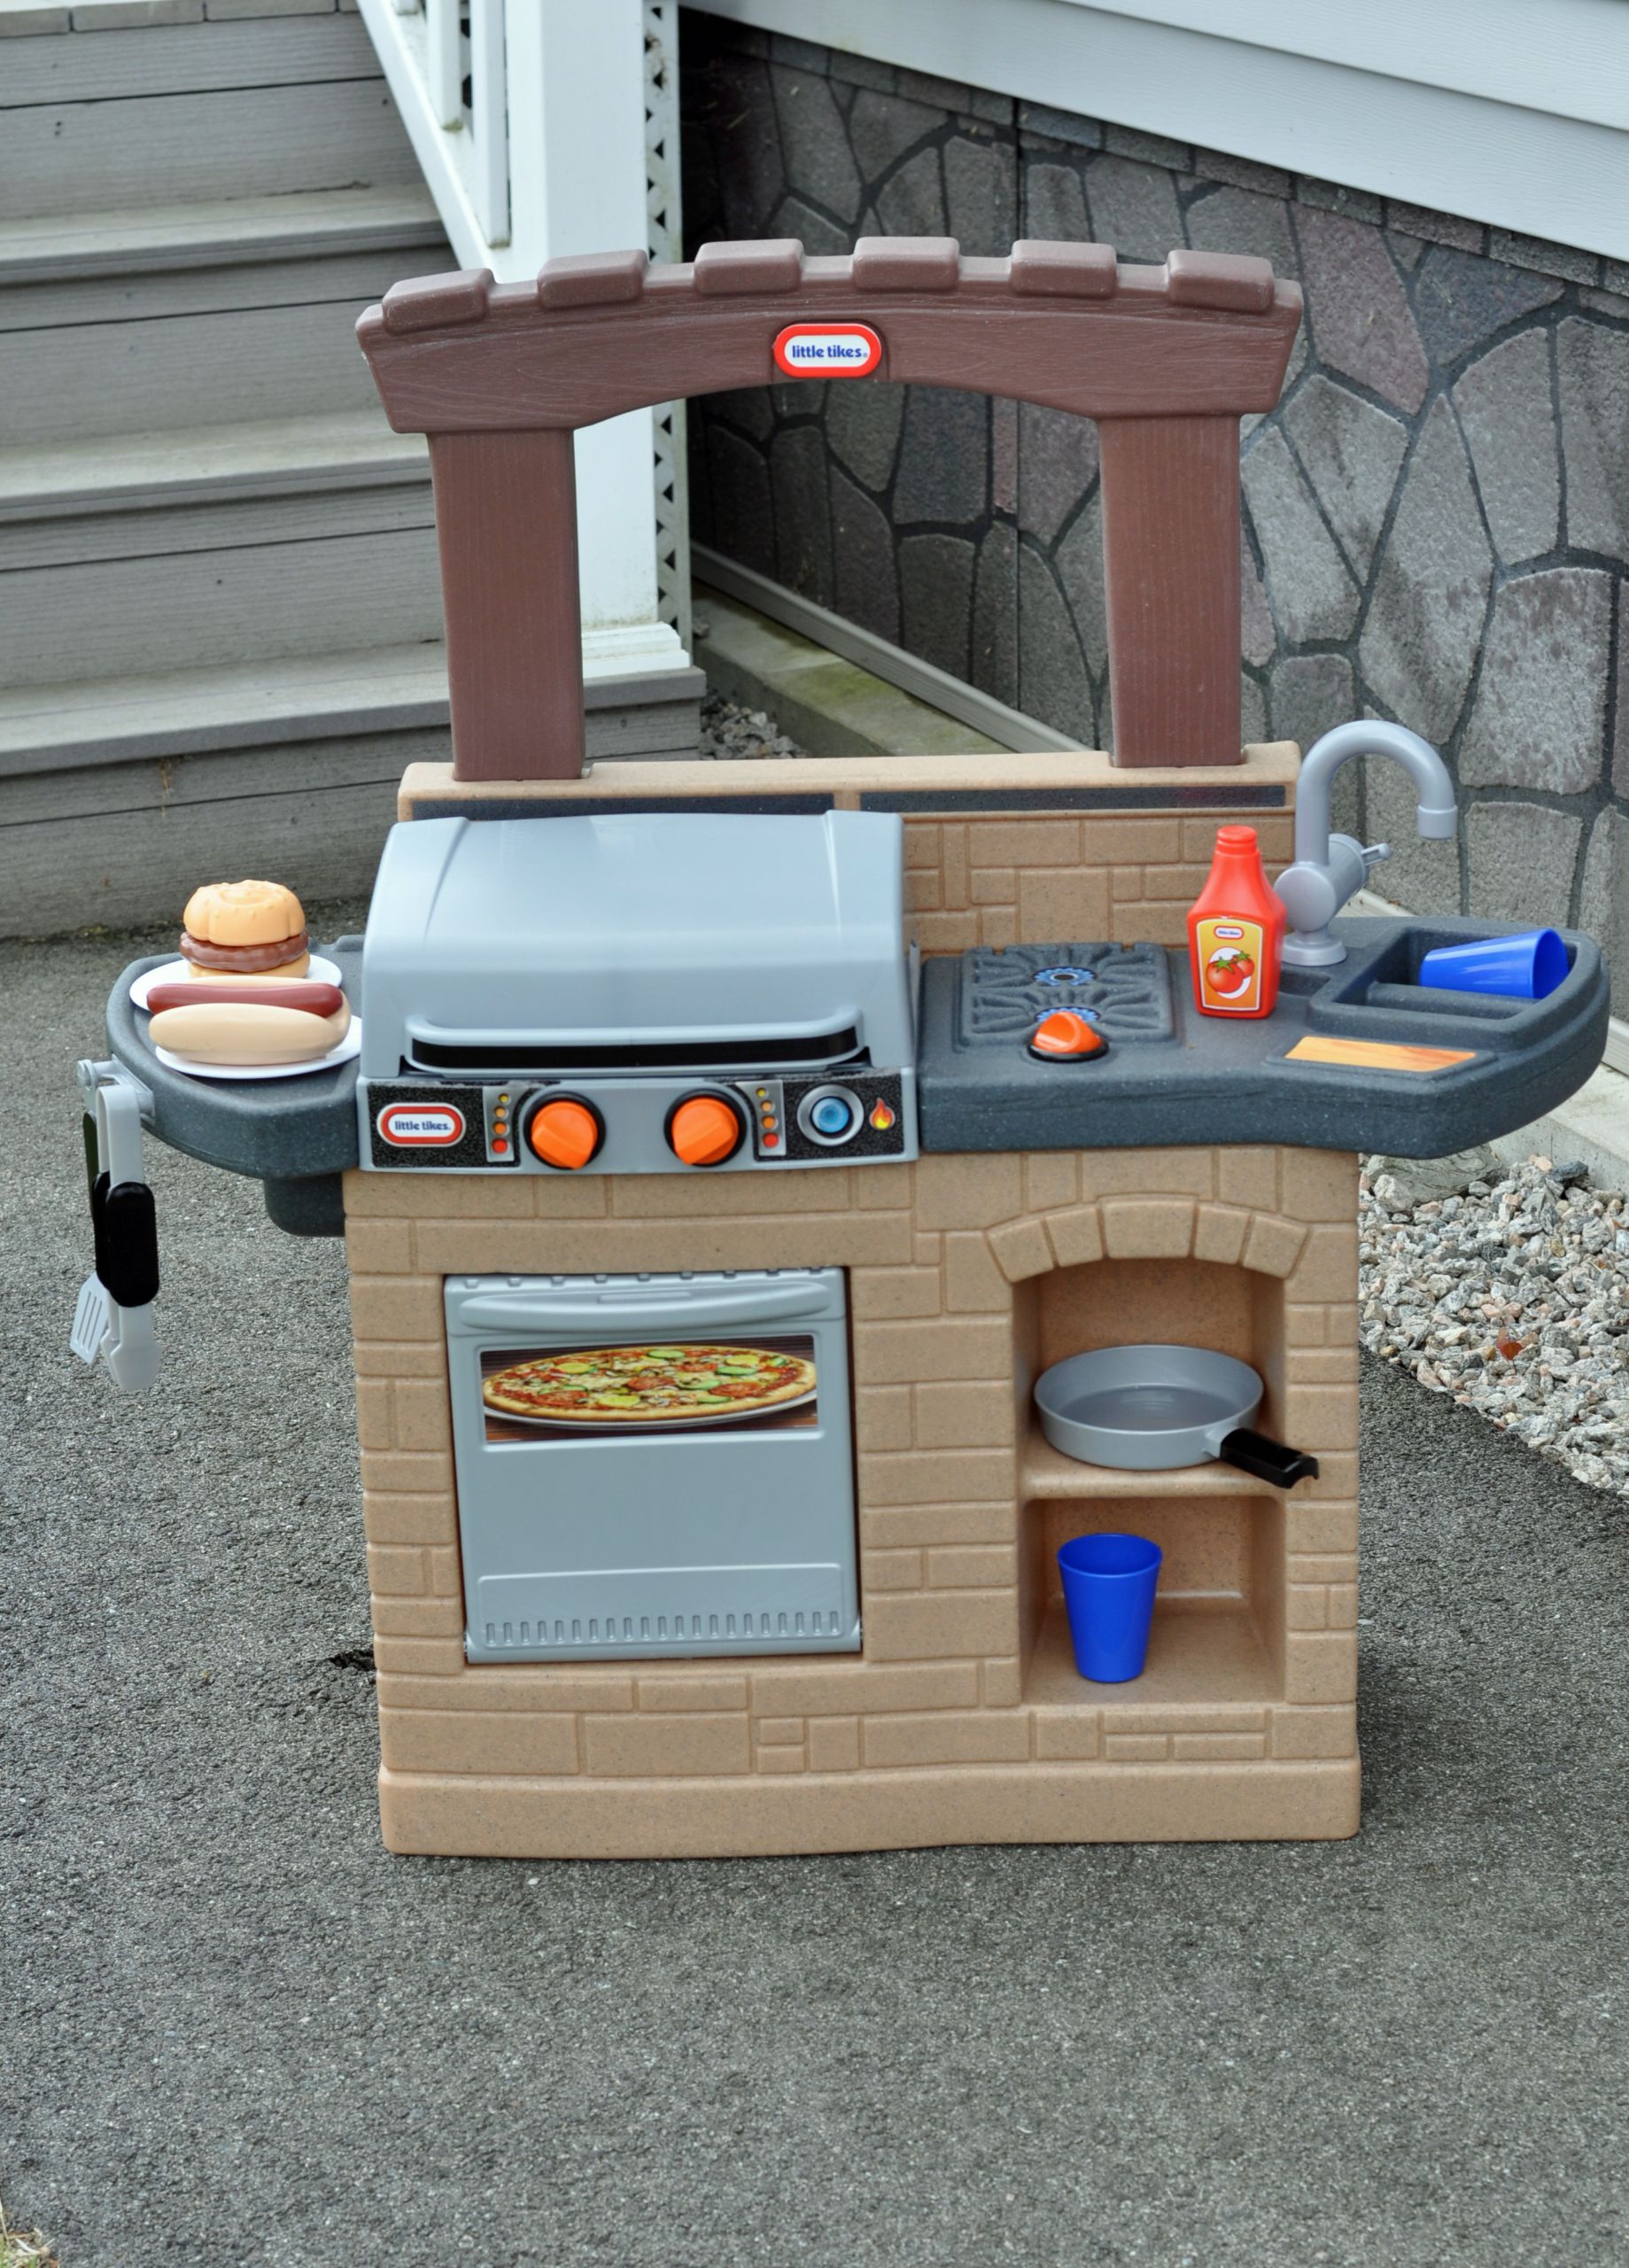 Little Tikes Backyard Barbeque
 Anytime Is Grilling Time With The New Little Tikes Cook n